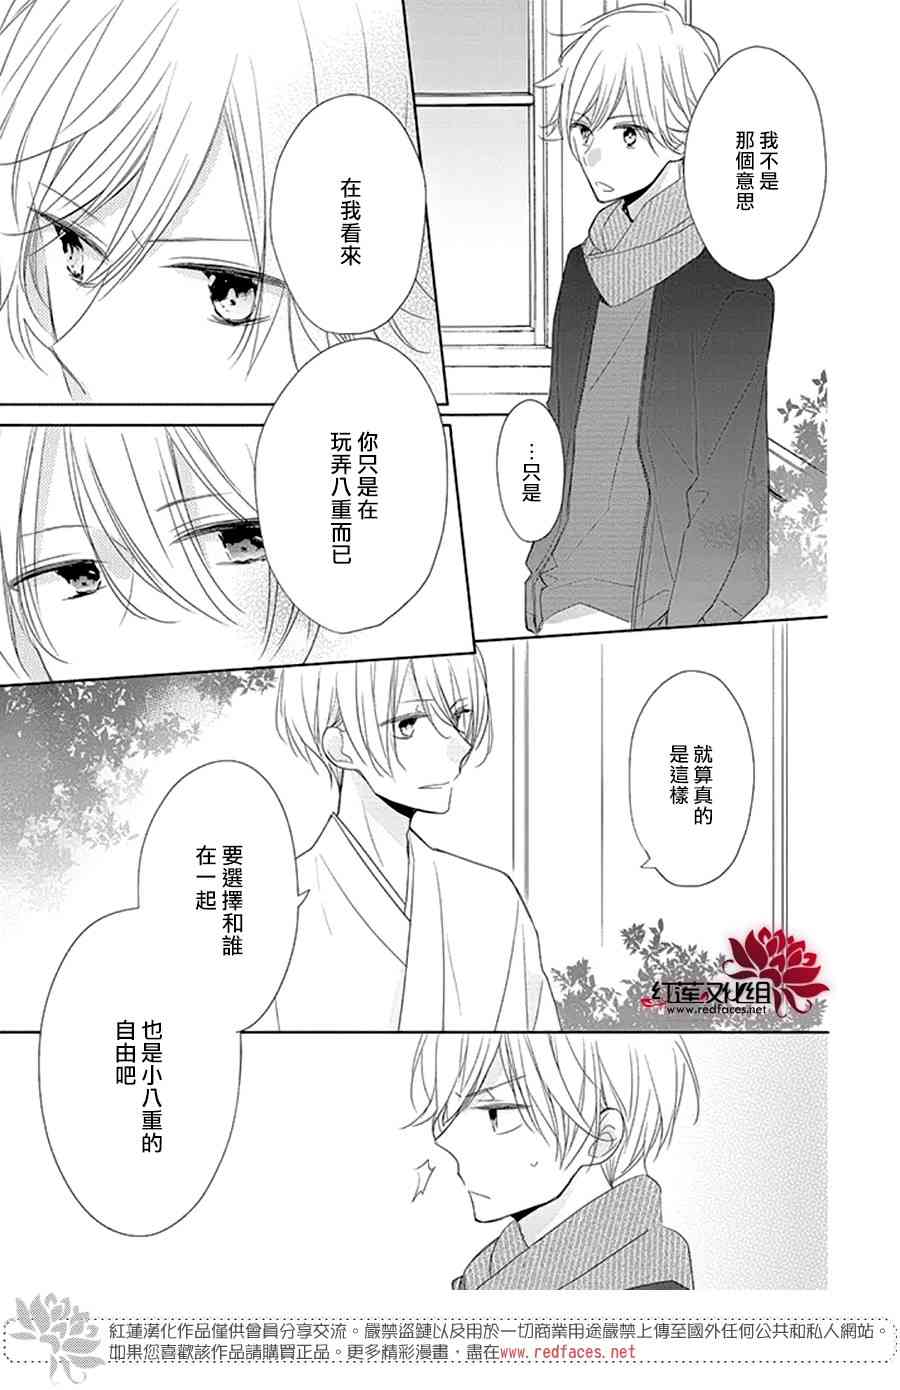 If given a second chance - 19話 - 3